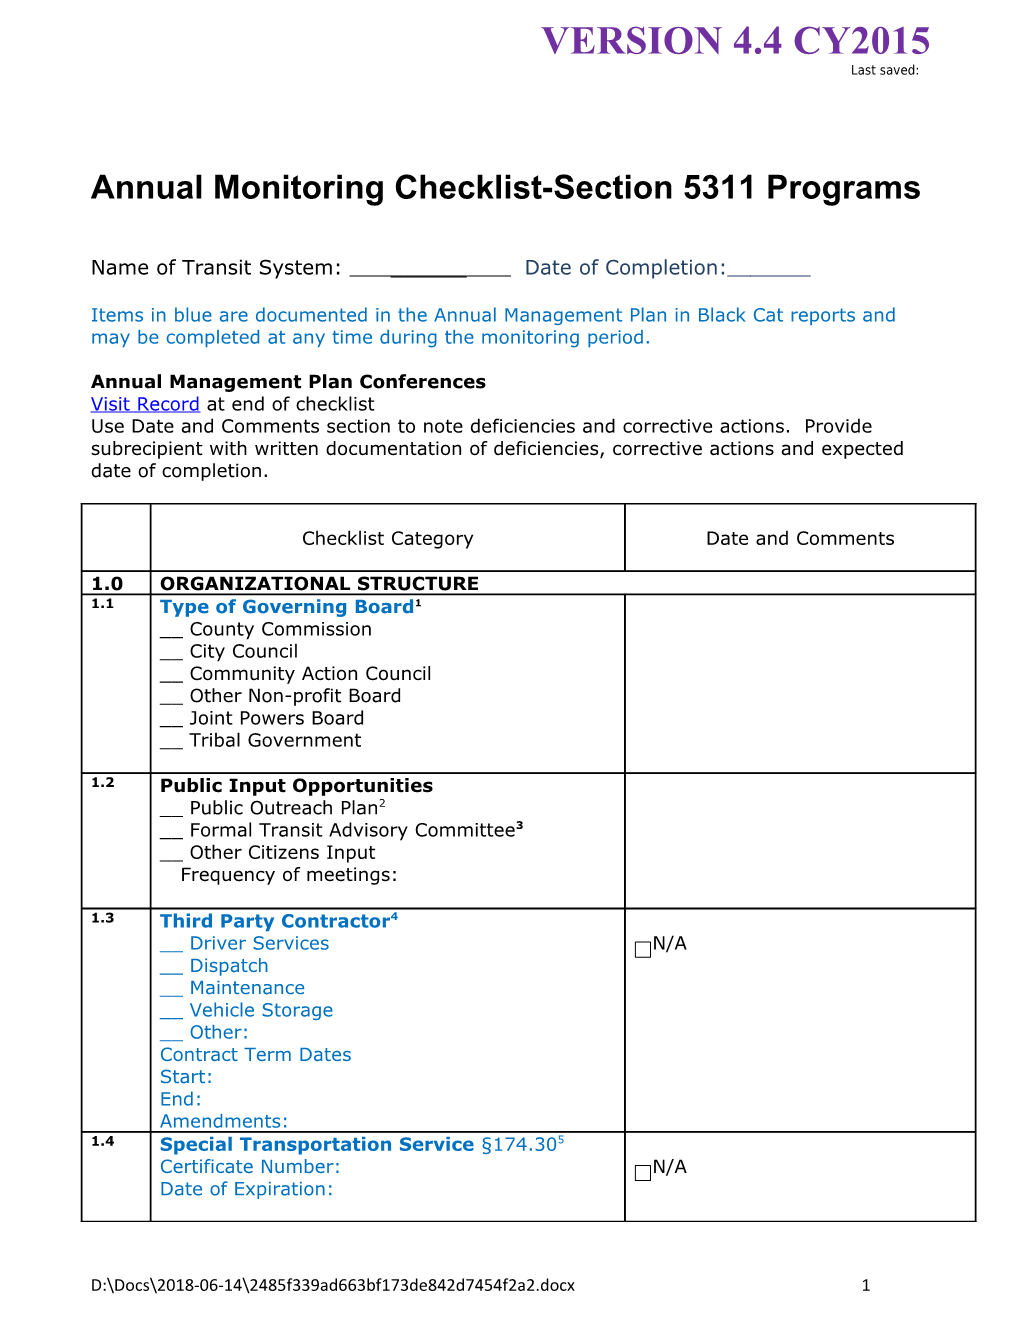 Annual Monitoring Checklist-Section 5311 Programs